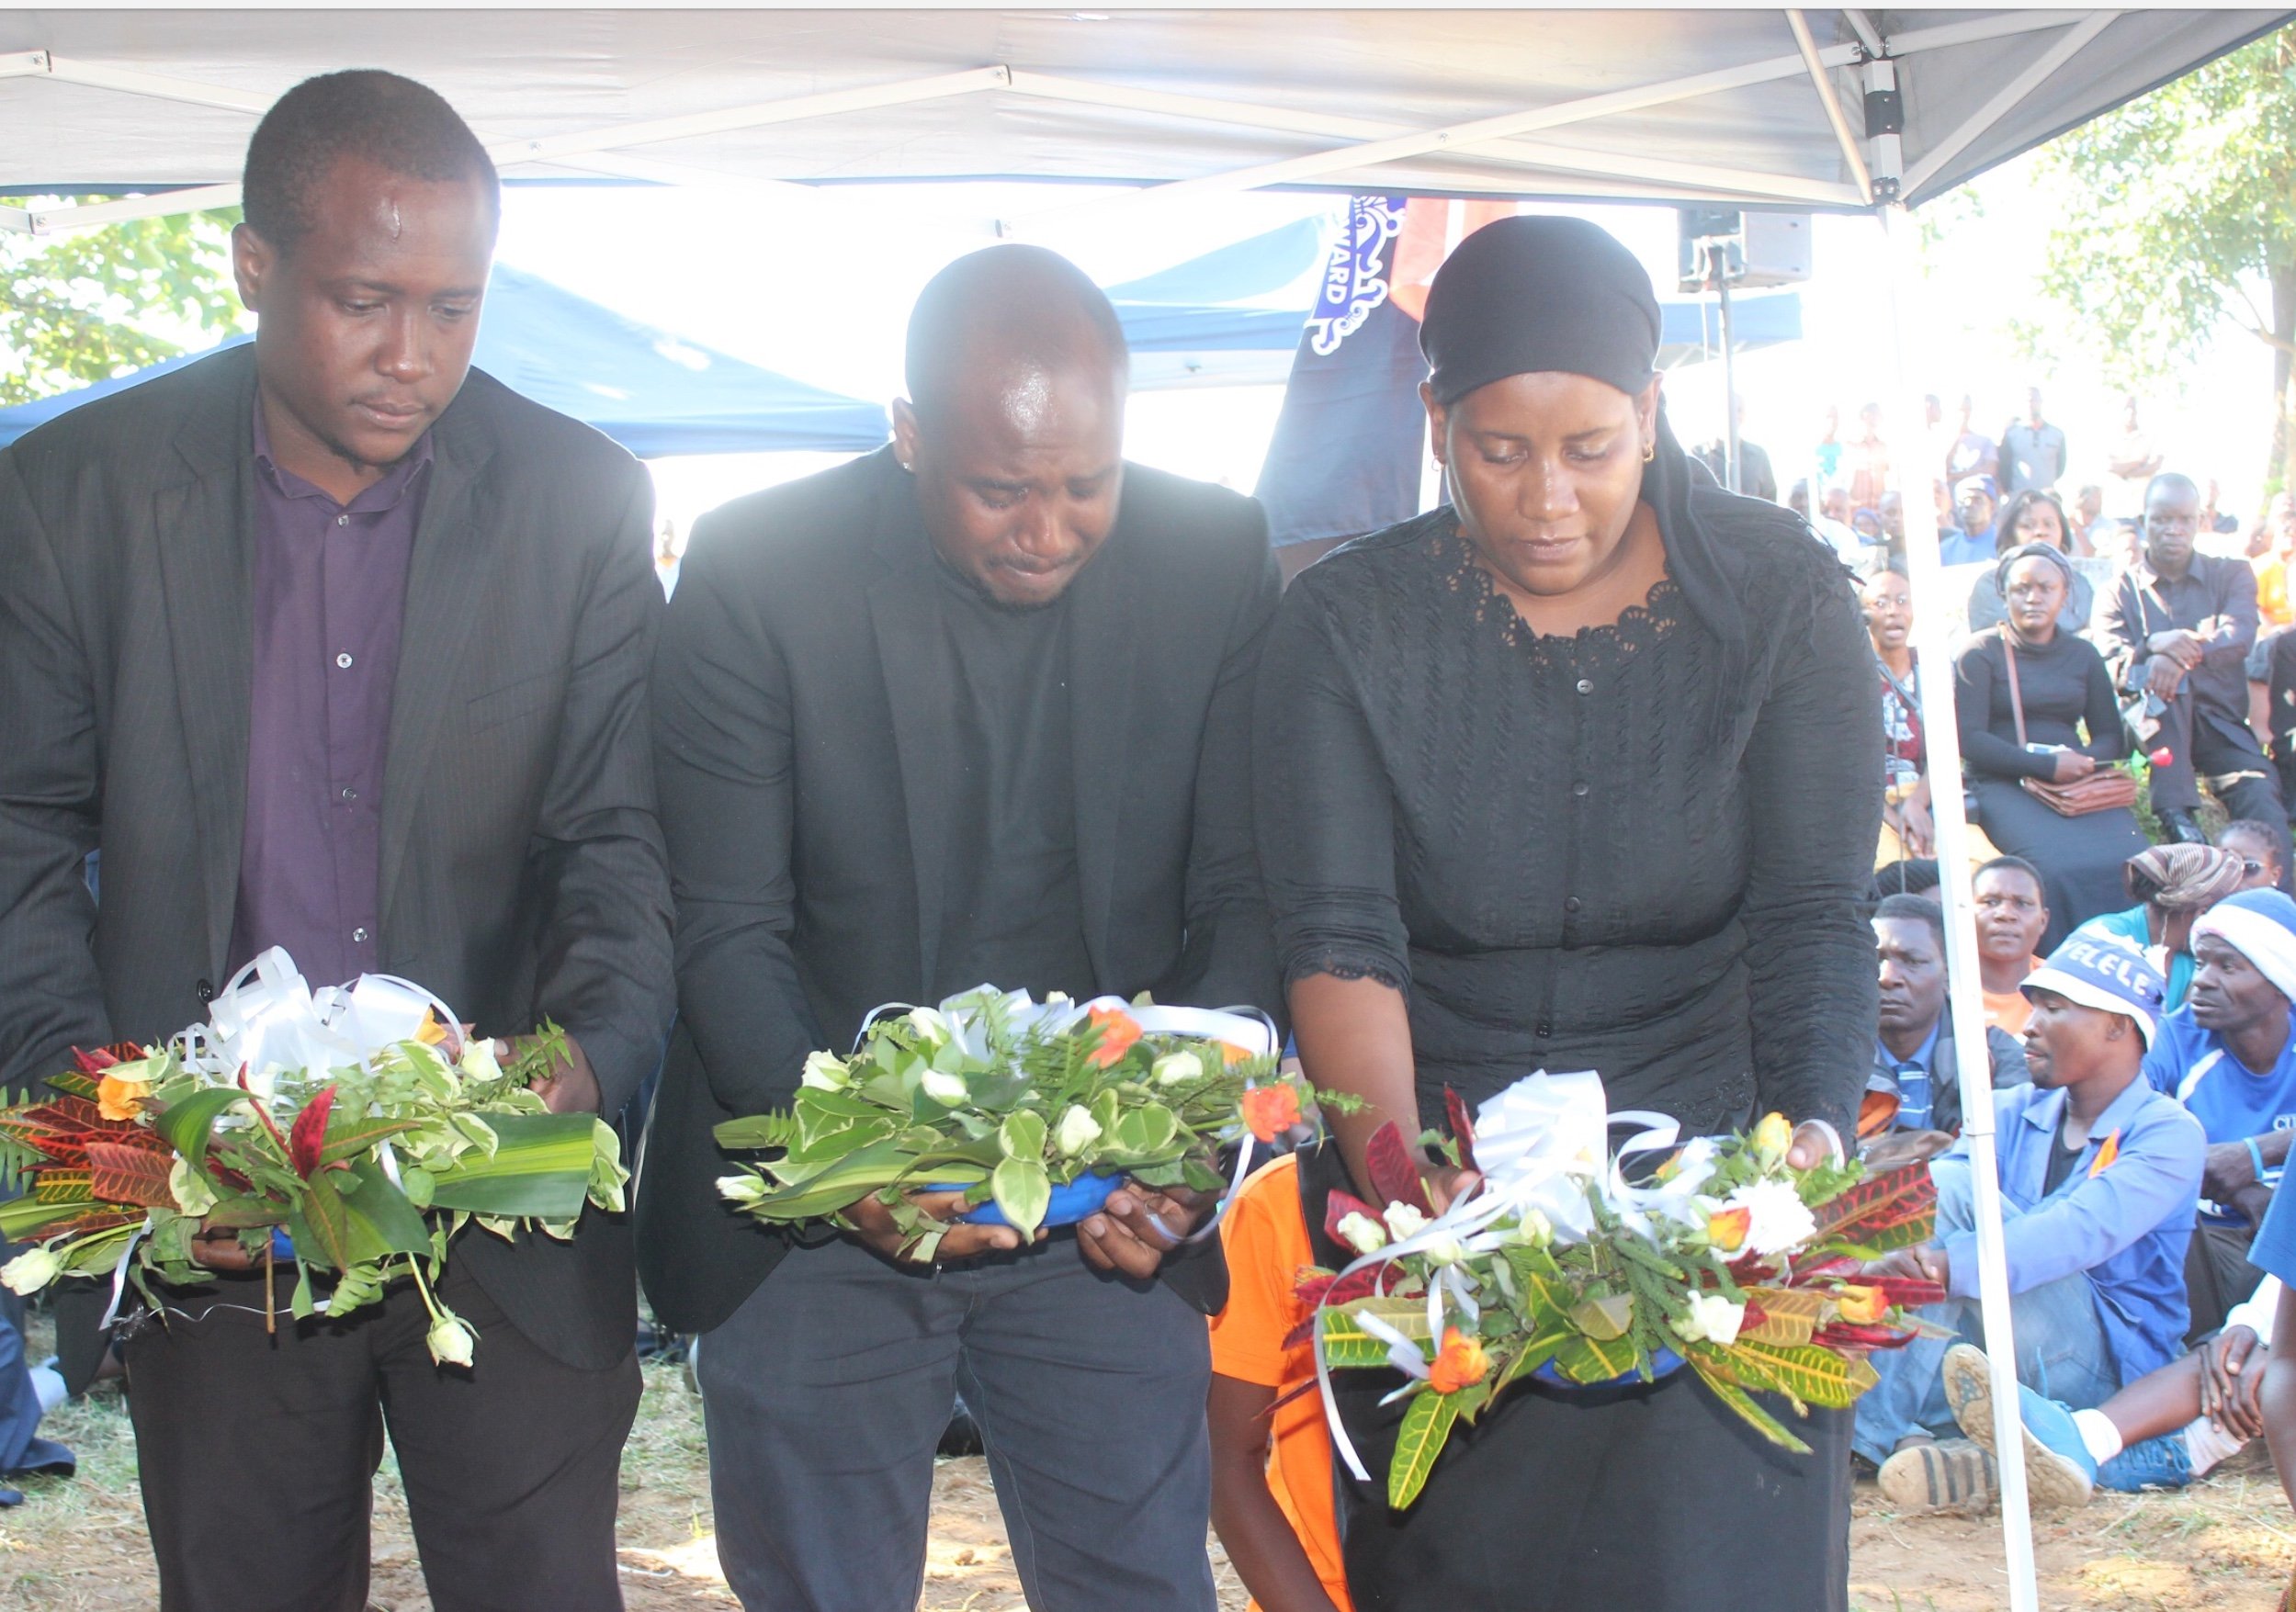 Malawi Legend Jack Chamangwana Laid To Rest After An Emotional Funeral